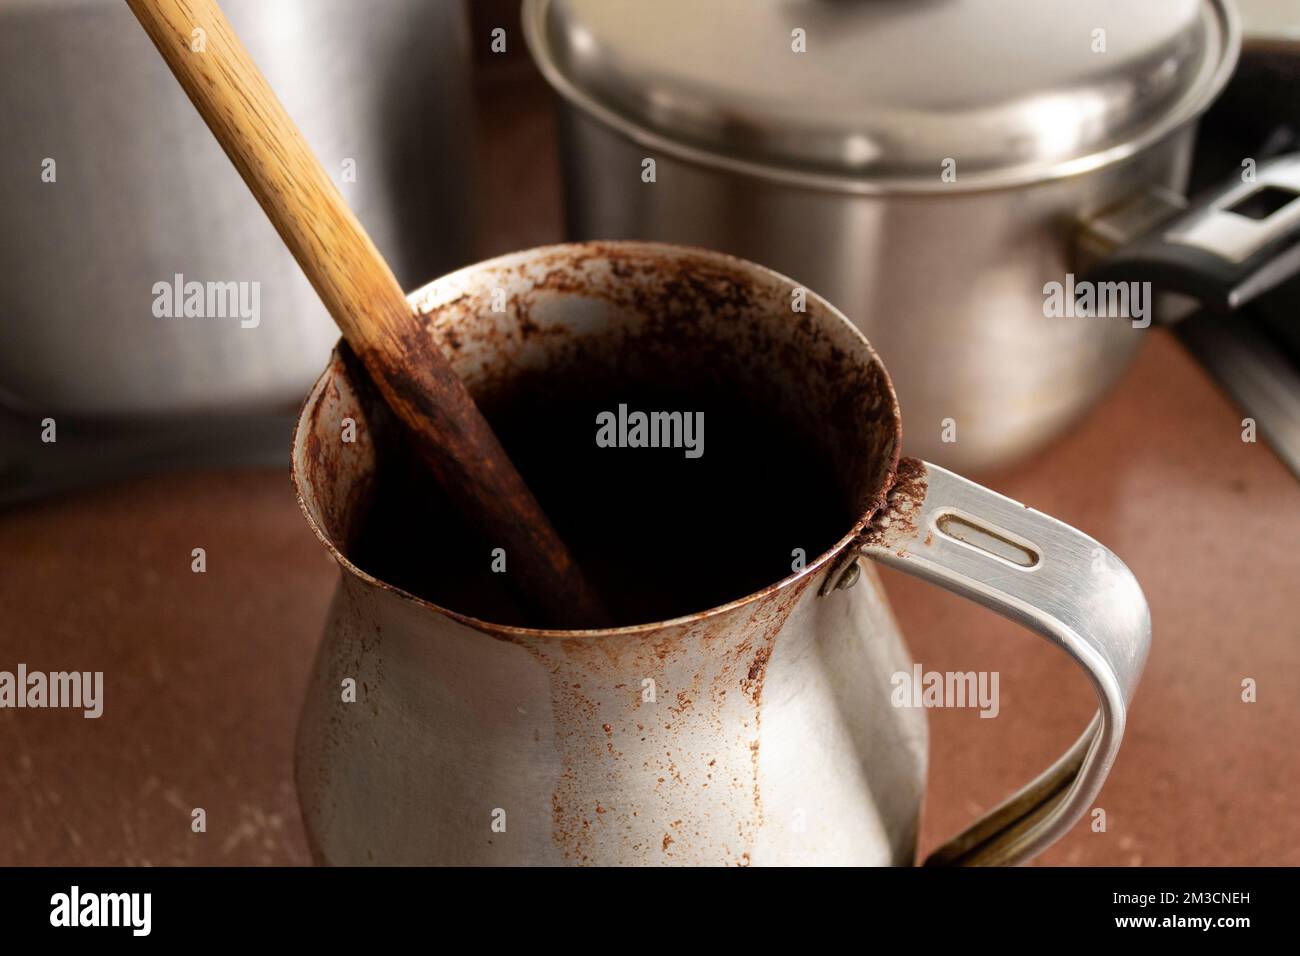 https://c8.alamy.com/comp/2M3CNEH/close-up-to-an-old-dirty-cocoa-cooking-pot-over-kitchen-furniture-with-others-cooking-pots-at-background-traditional-kitchen-concept-2M3CNEH.jpg